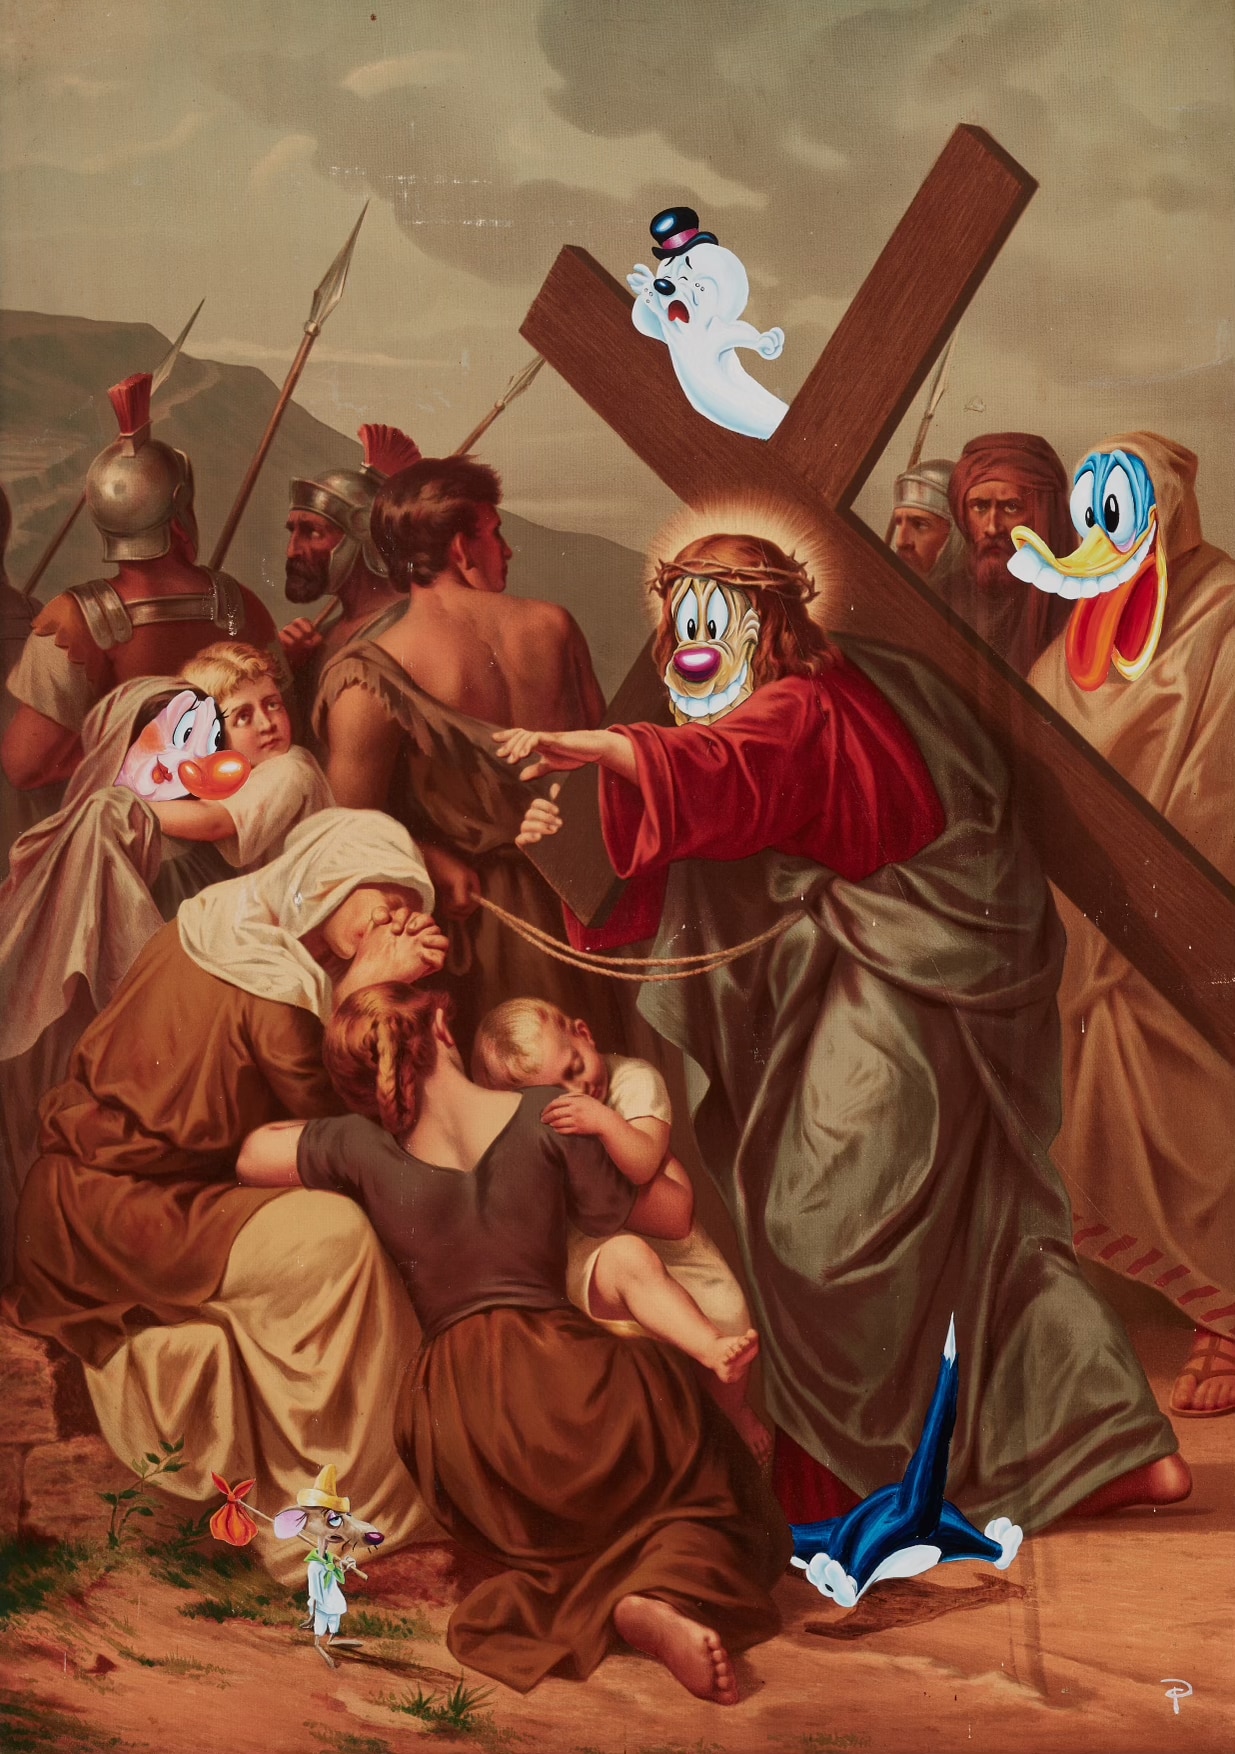 A biblical painting of Jesus Christ in which various characters have been replaces with cartoon characters